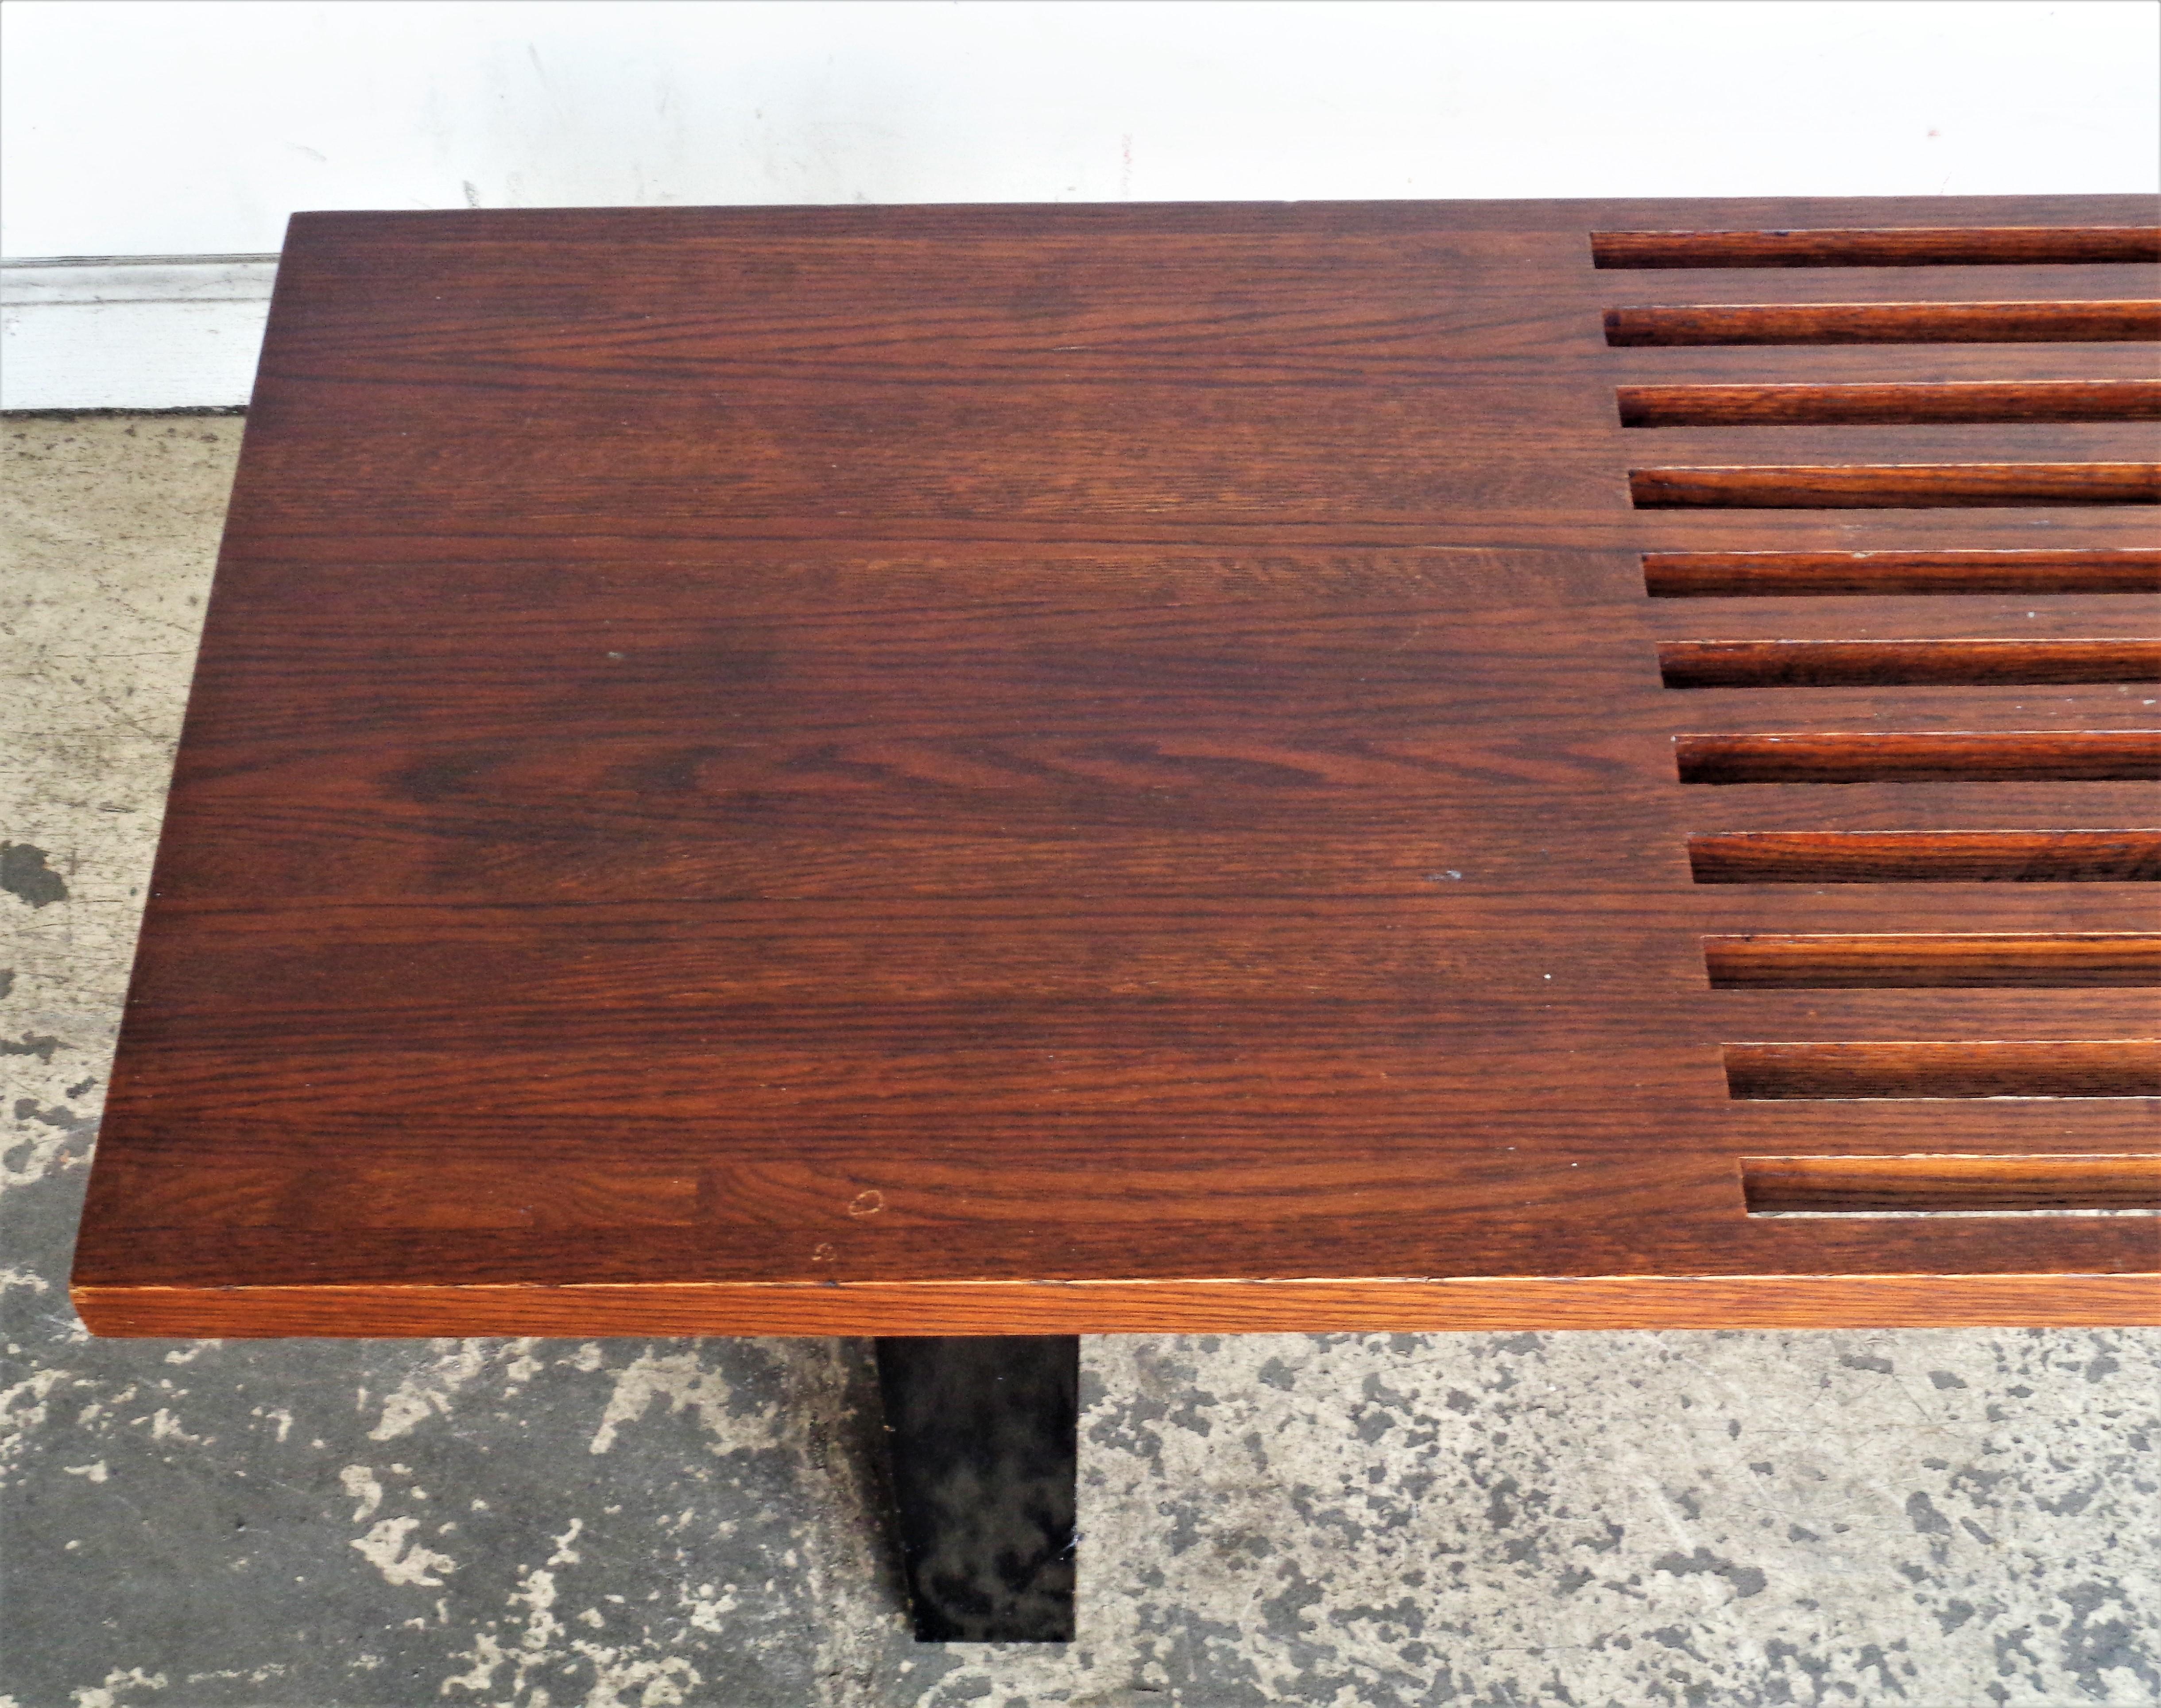 Slatted wood platform bench / low table in the style of George Nelson for Herman Miller. All original condition with nicely aged finish to grained oak top and ebonized legs. Circa 1950-1960. Look at pictures and read condition report in comment